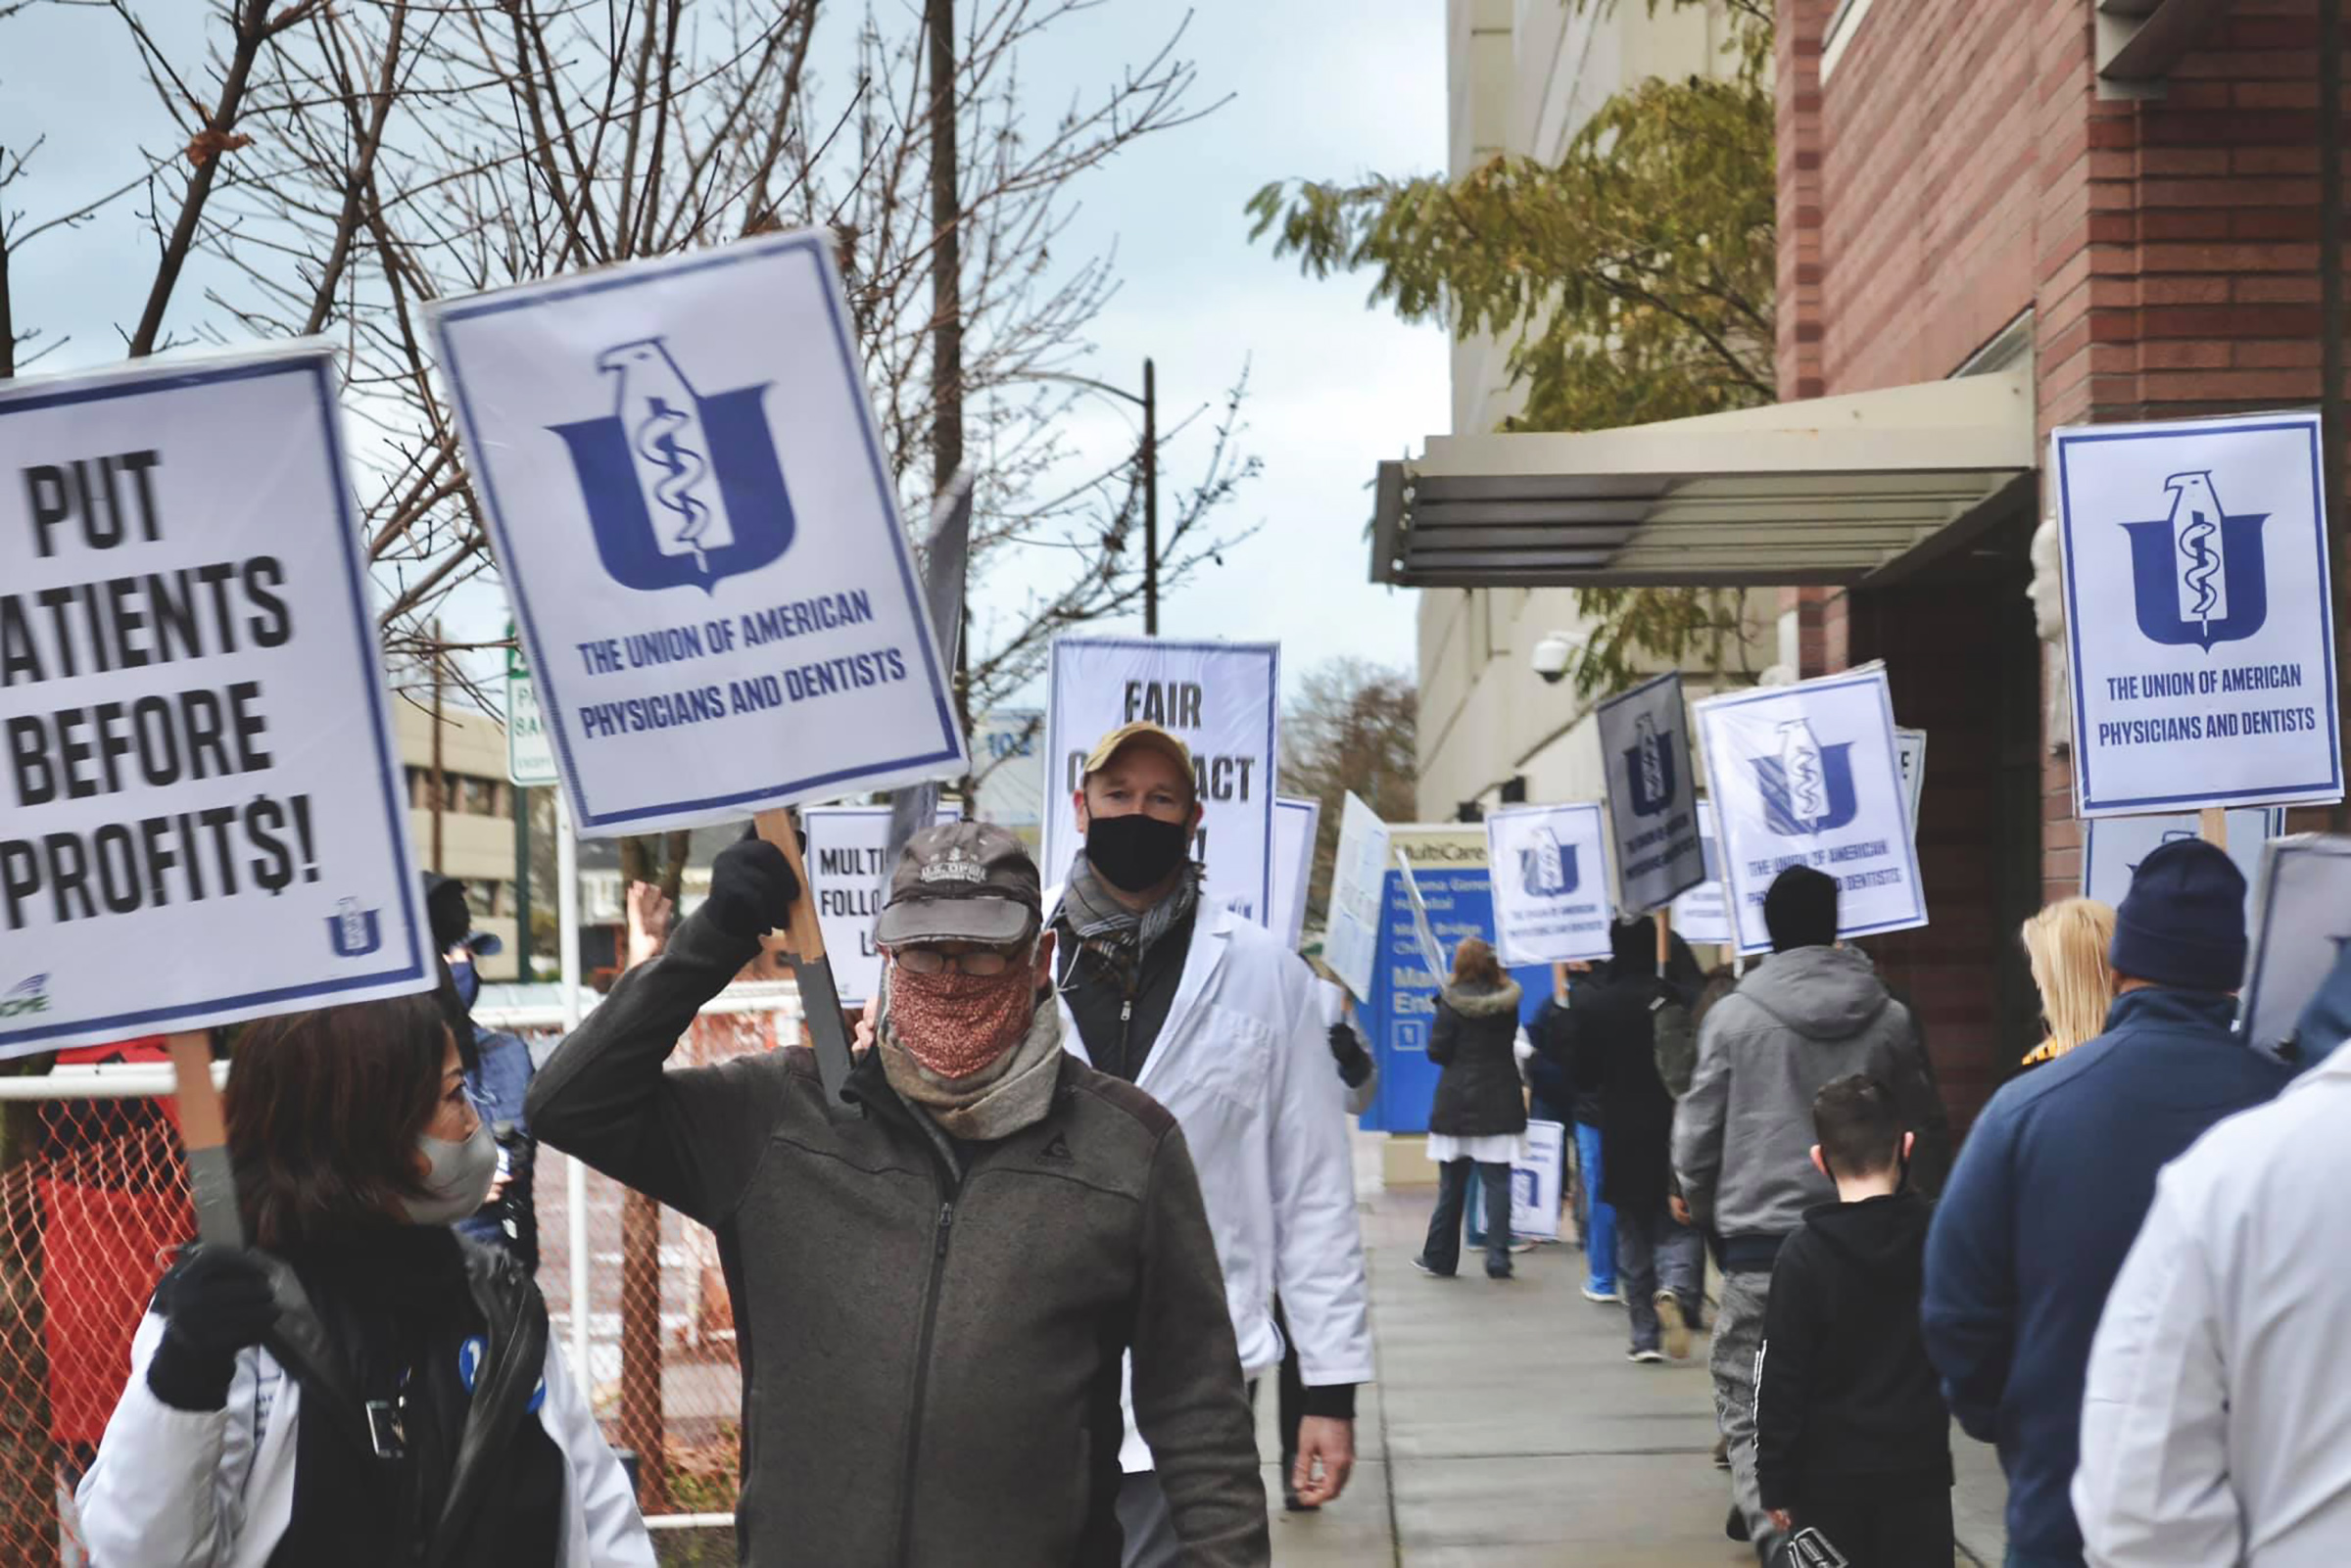 After the MultiCare providers went on strike in November, the company ignored their demands for weeks. But after finding itself under media scrutiny, it reversed course and offered urgent care providers N95s starting Dec. 14. (Courtesy Zack Pattin)